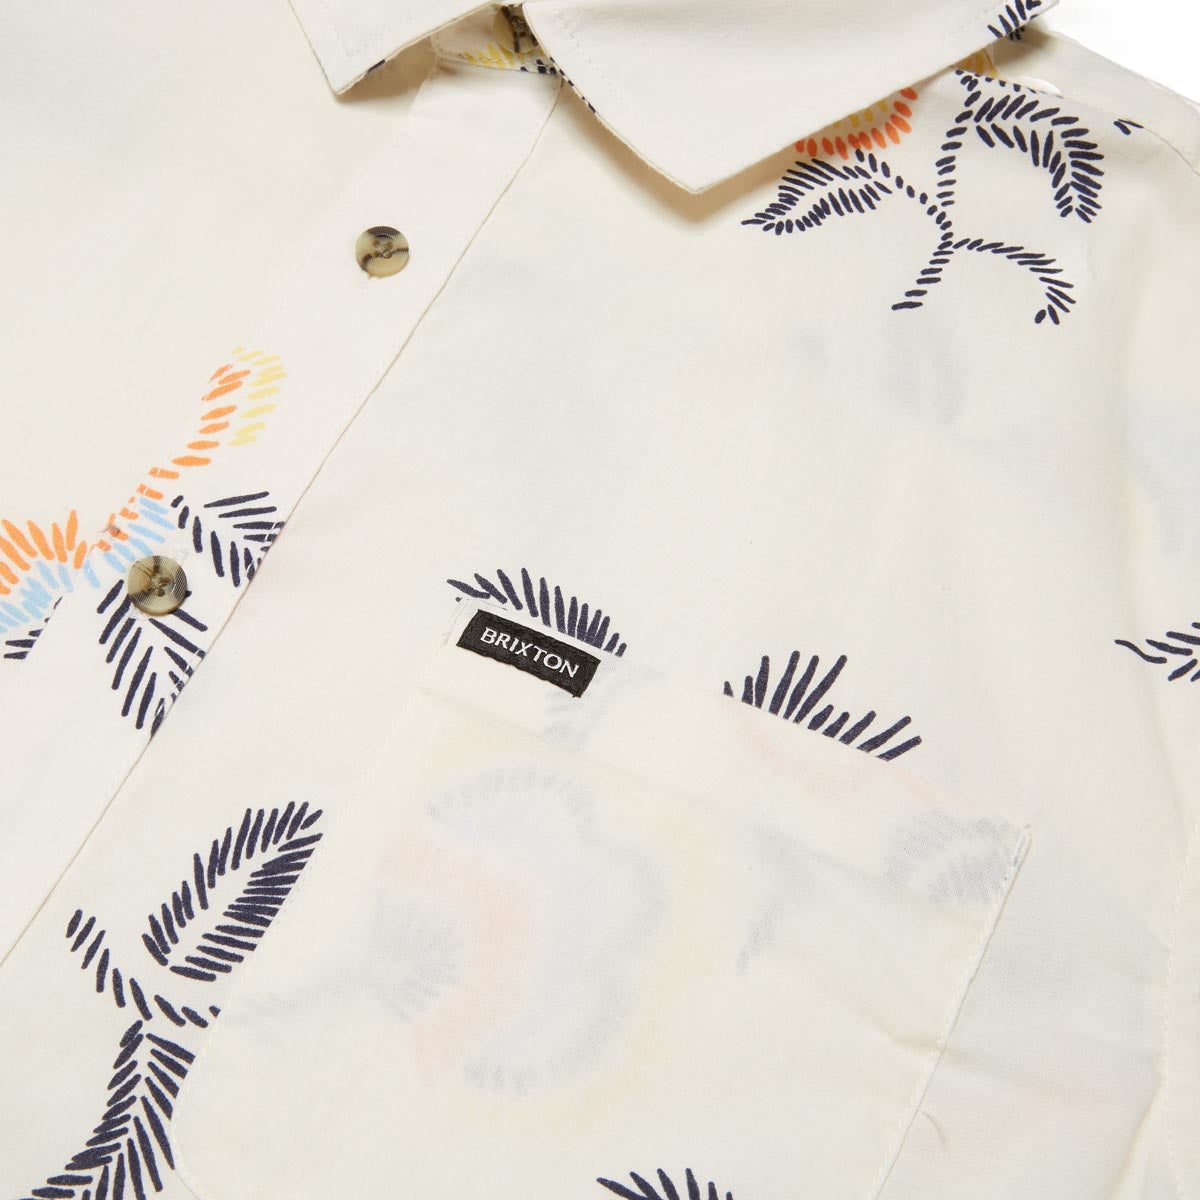 Brixton Charter Shirt - White Field Floral image 3